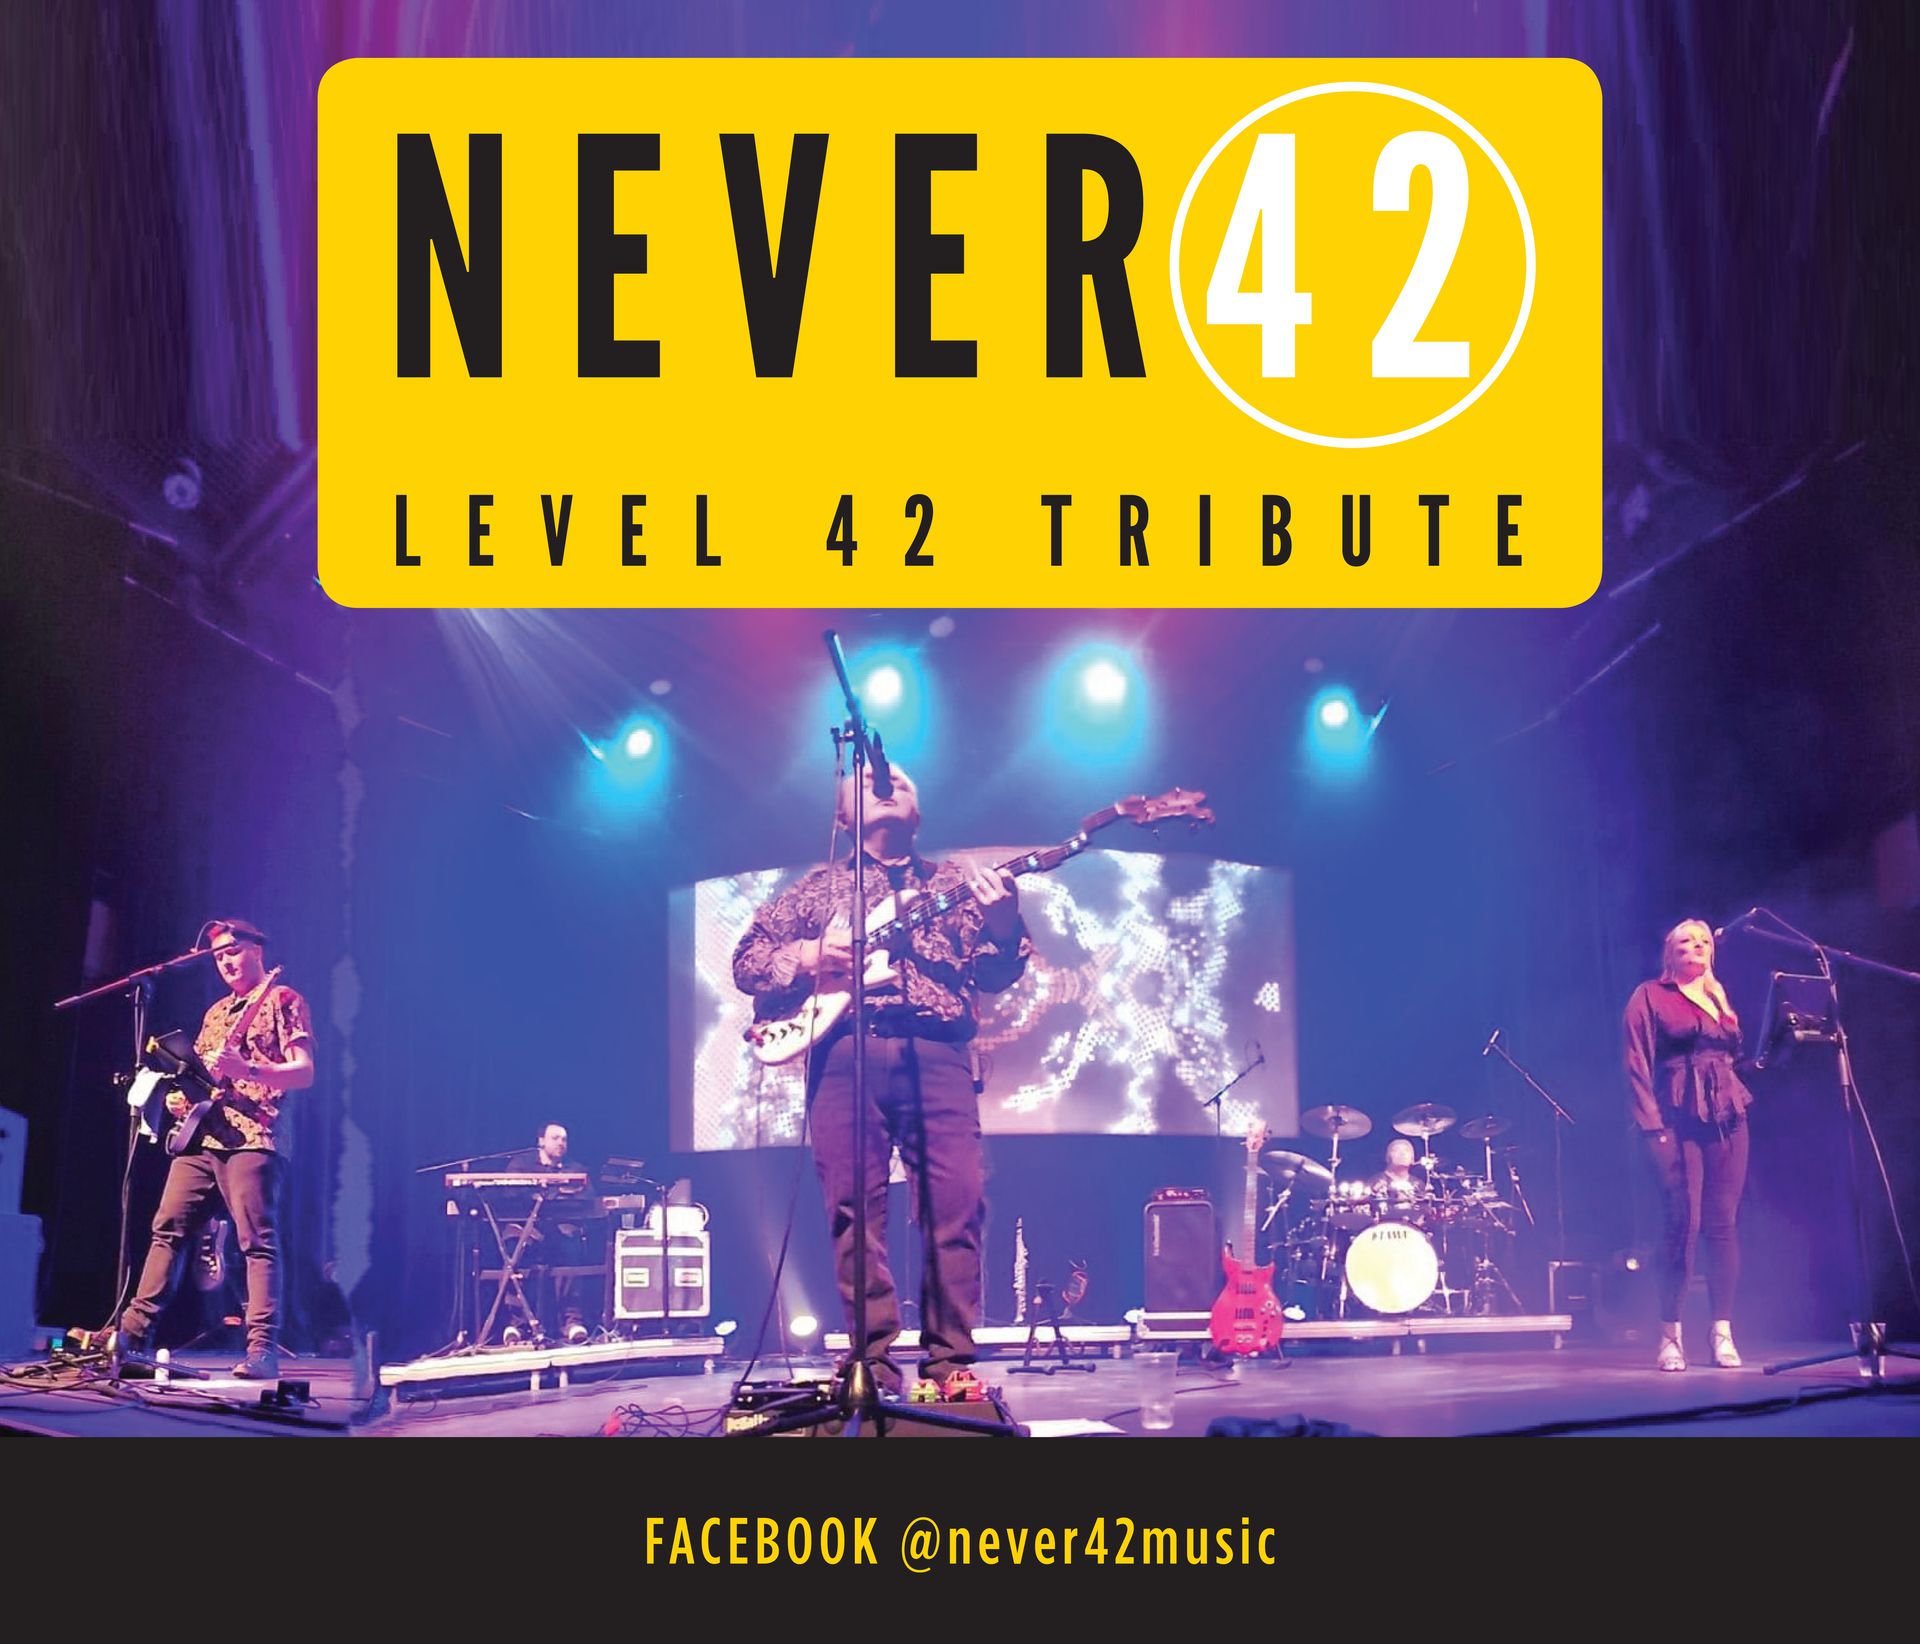 Never 42, tribute to Level 42